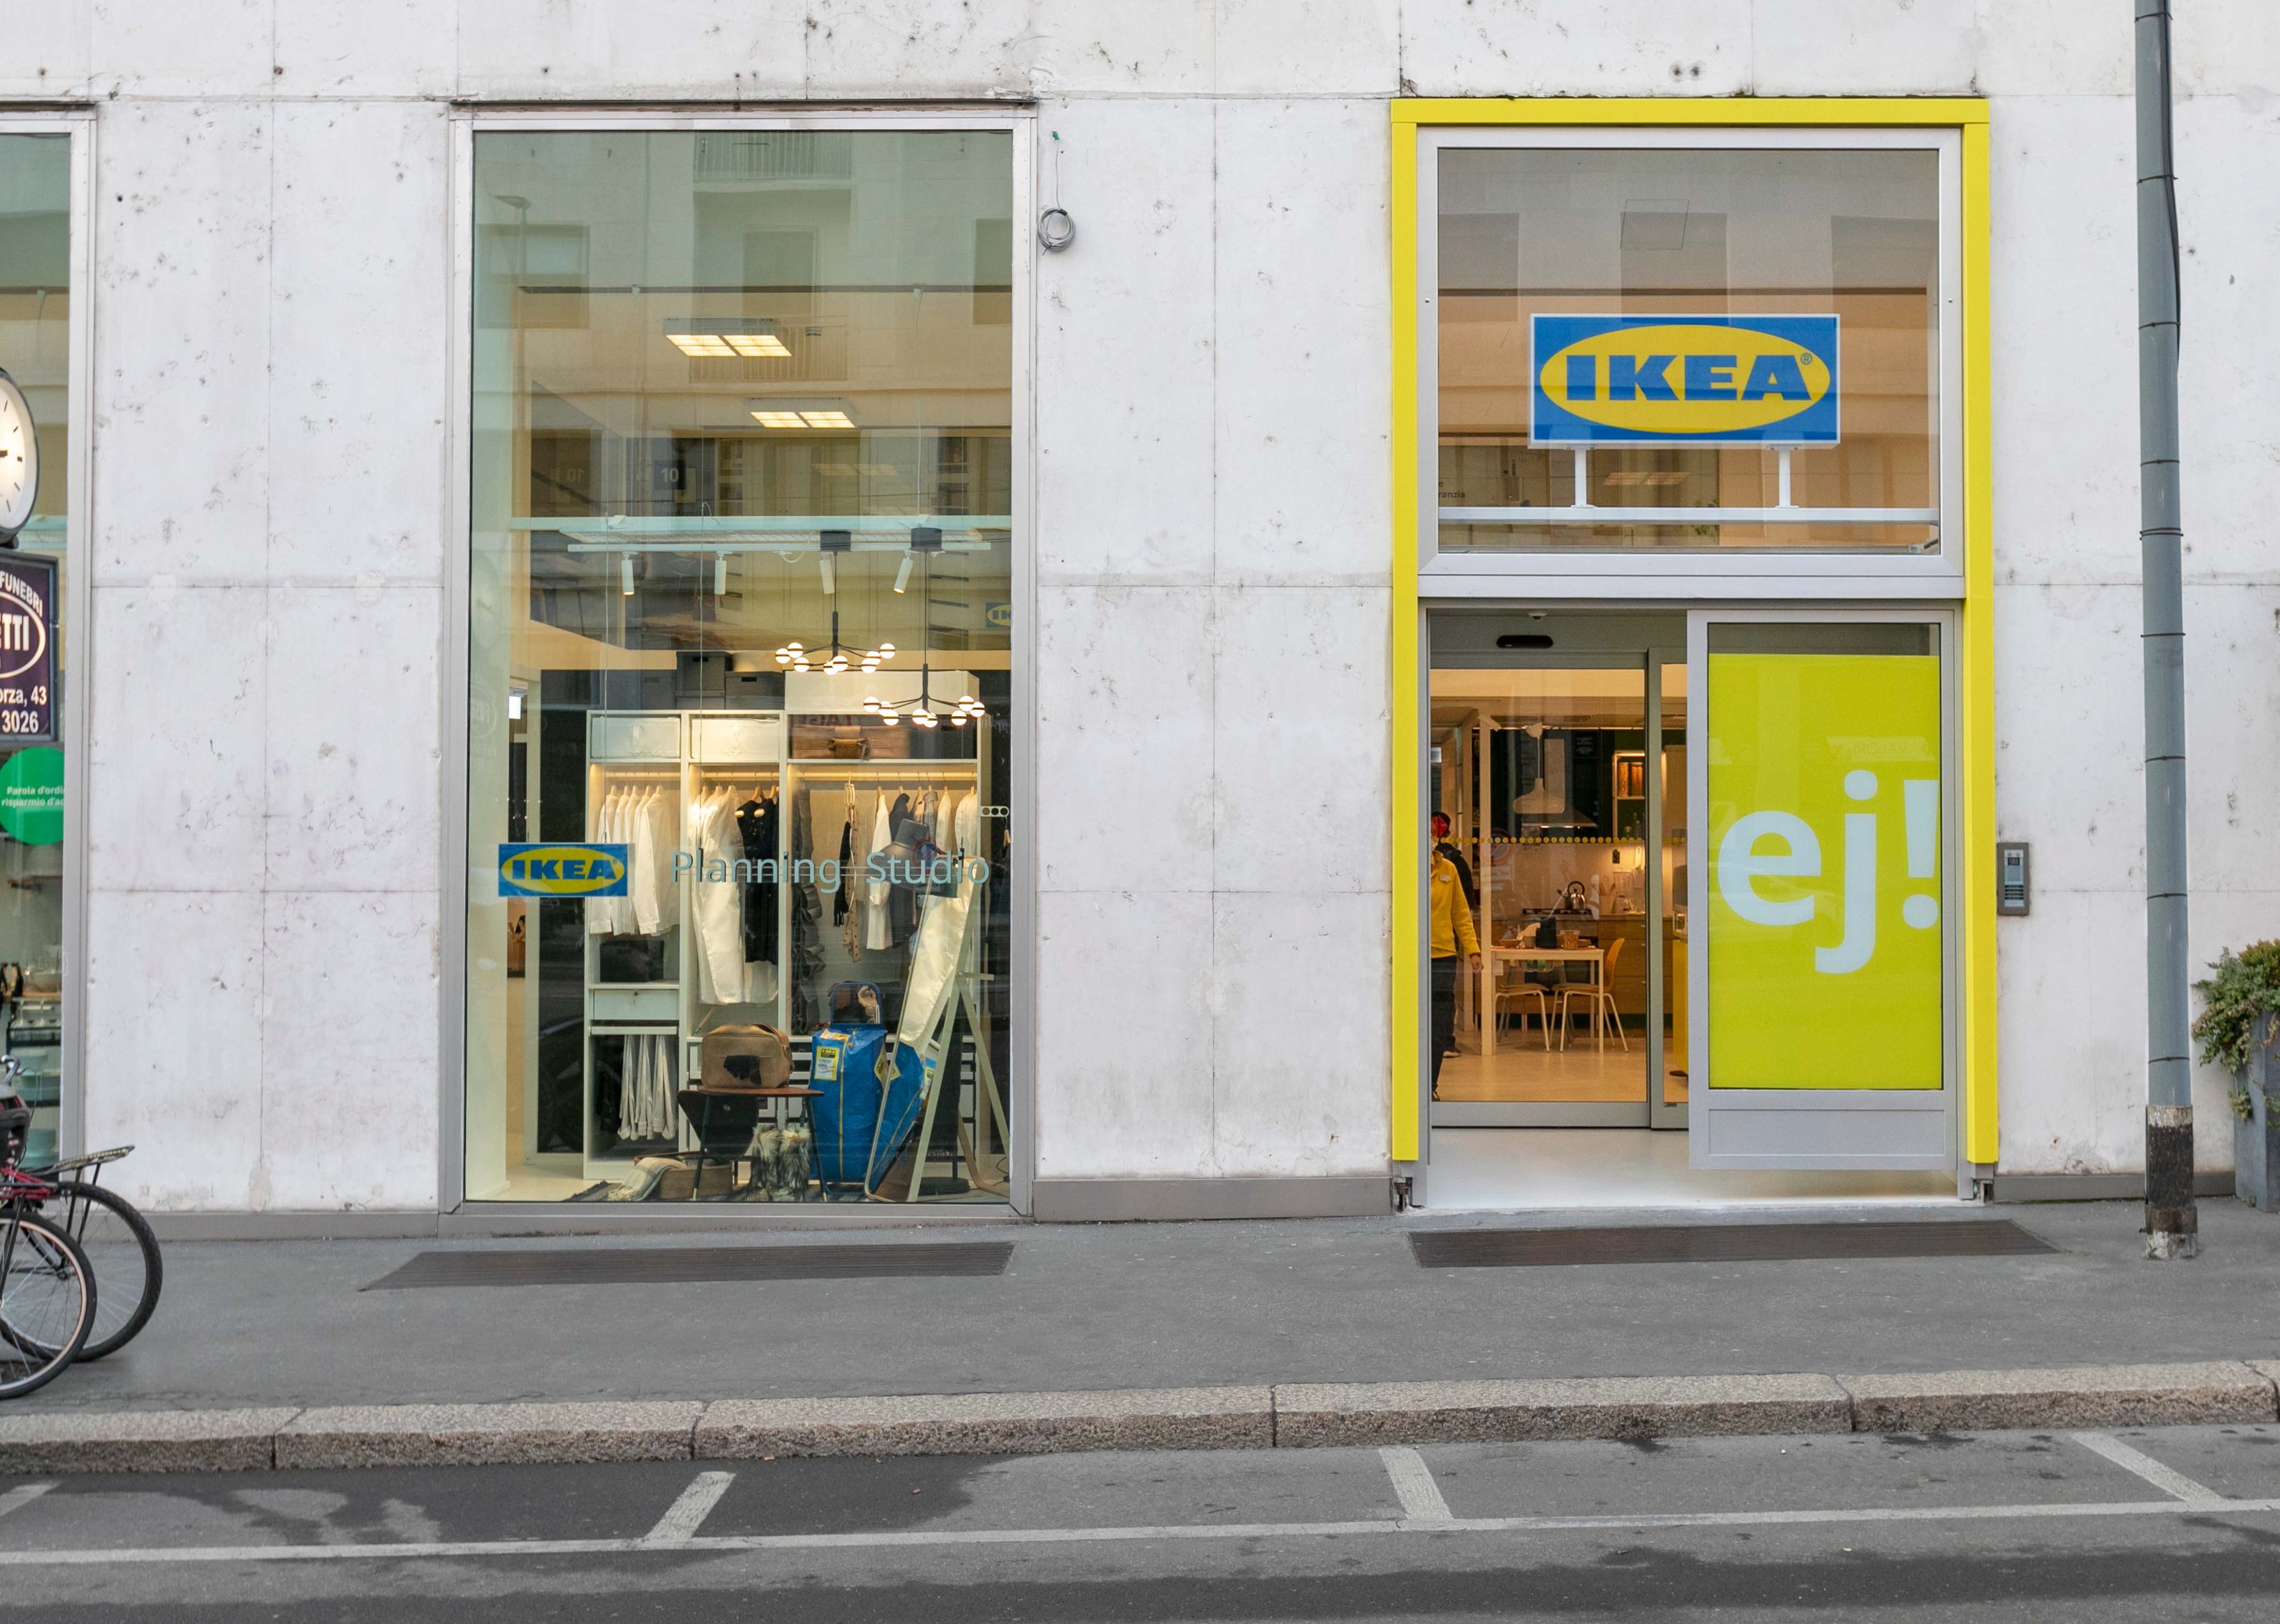 IKEA Stock: Can You Buy IKEA Shares & Will They Go Public? 2022